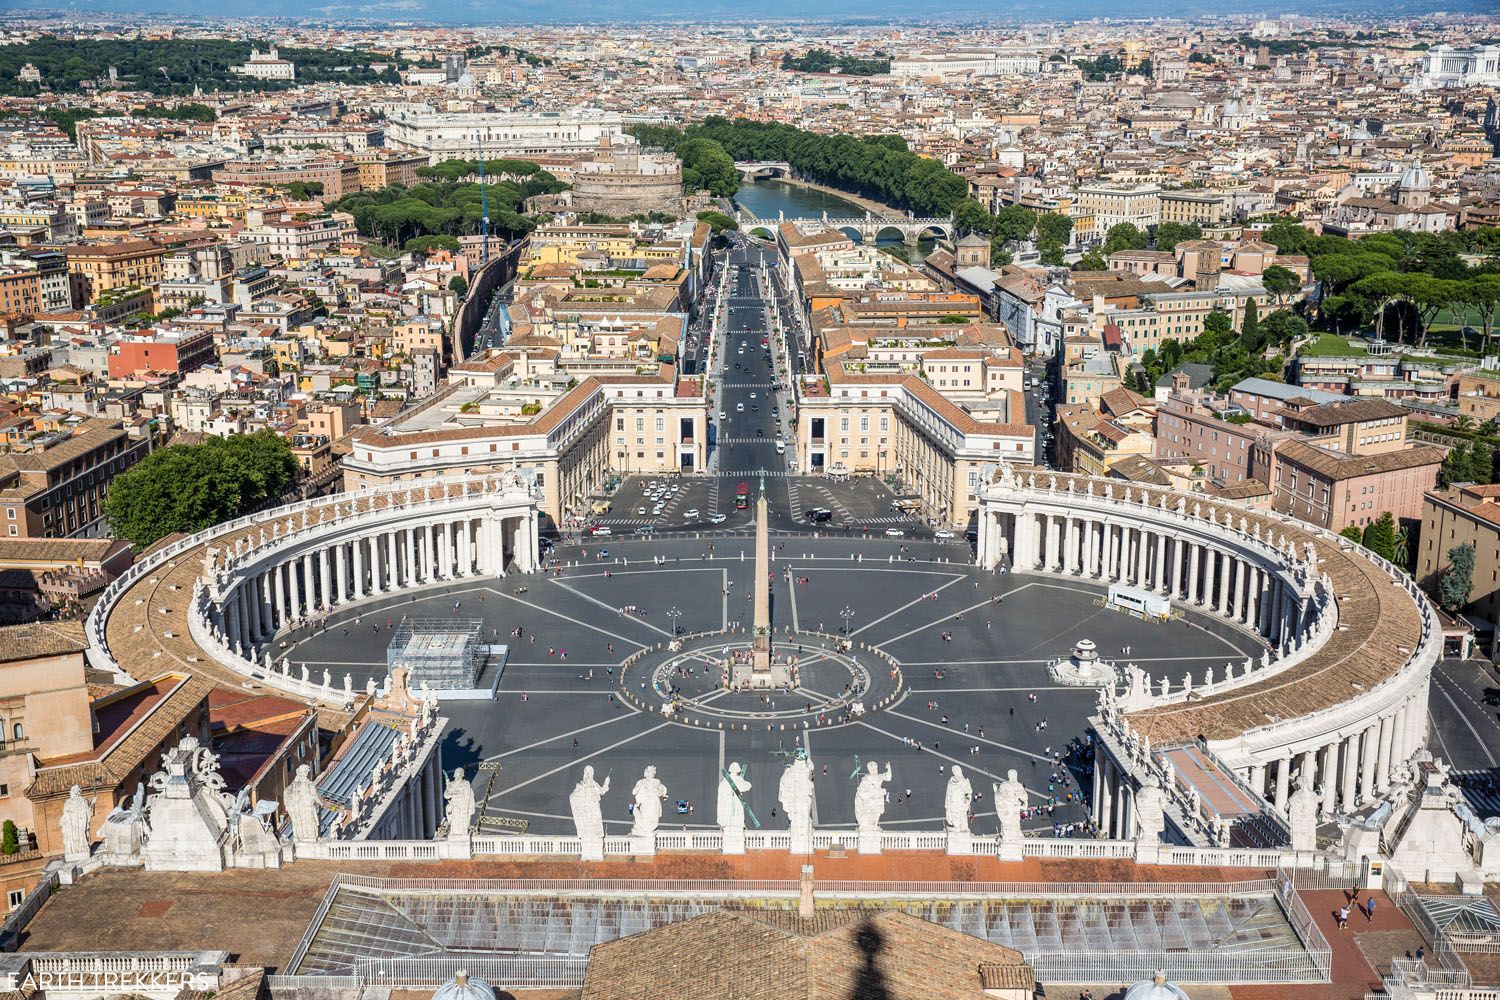 St Peters Square Rome Italy | How to visit the Vatican Museums and St. Peter's Basilica